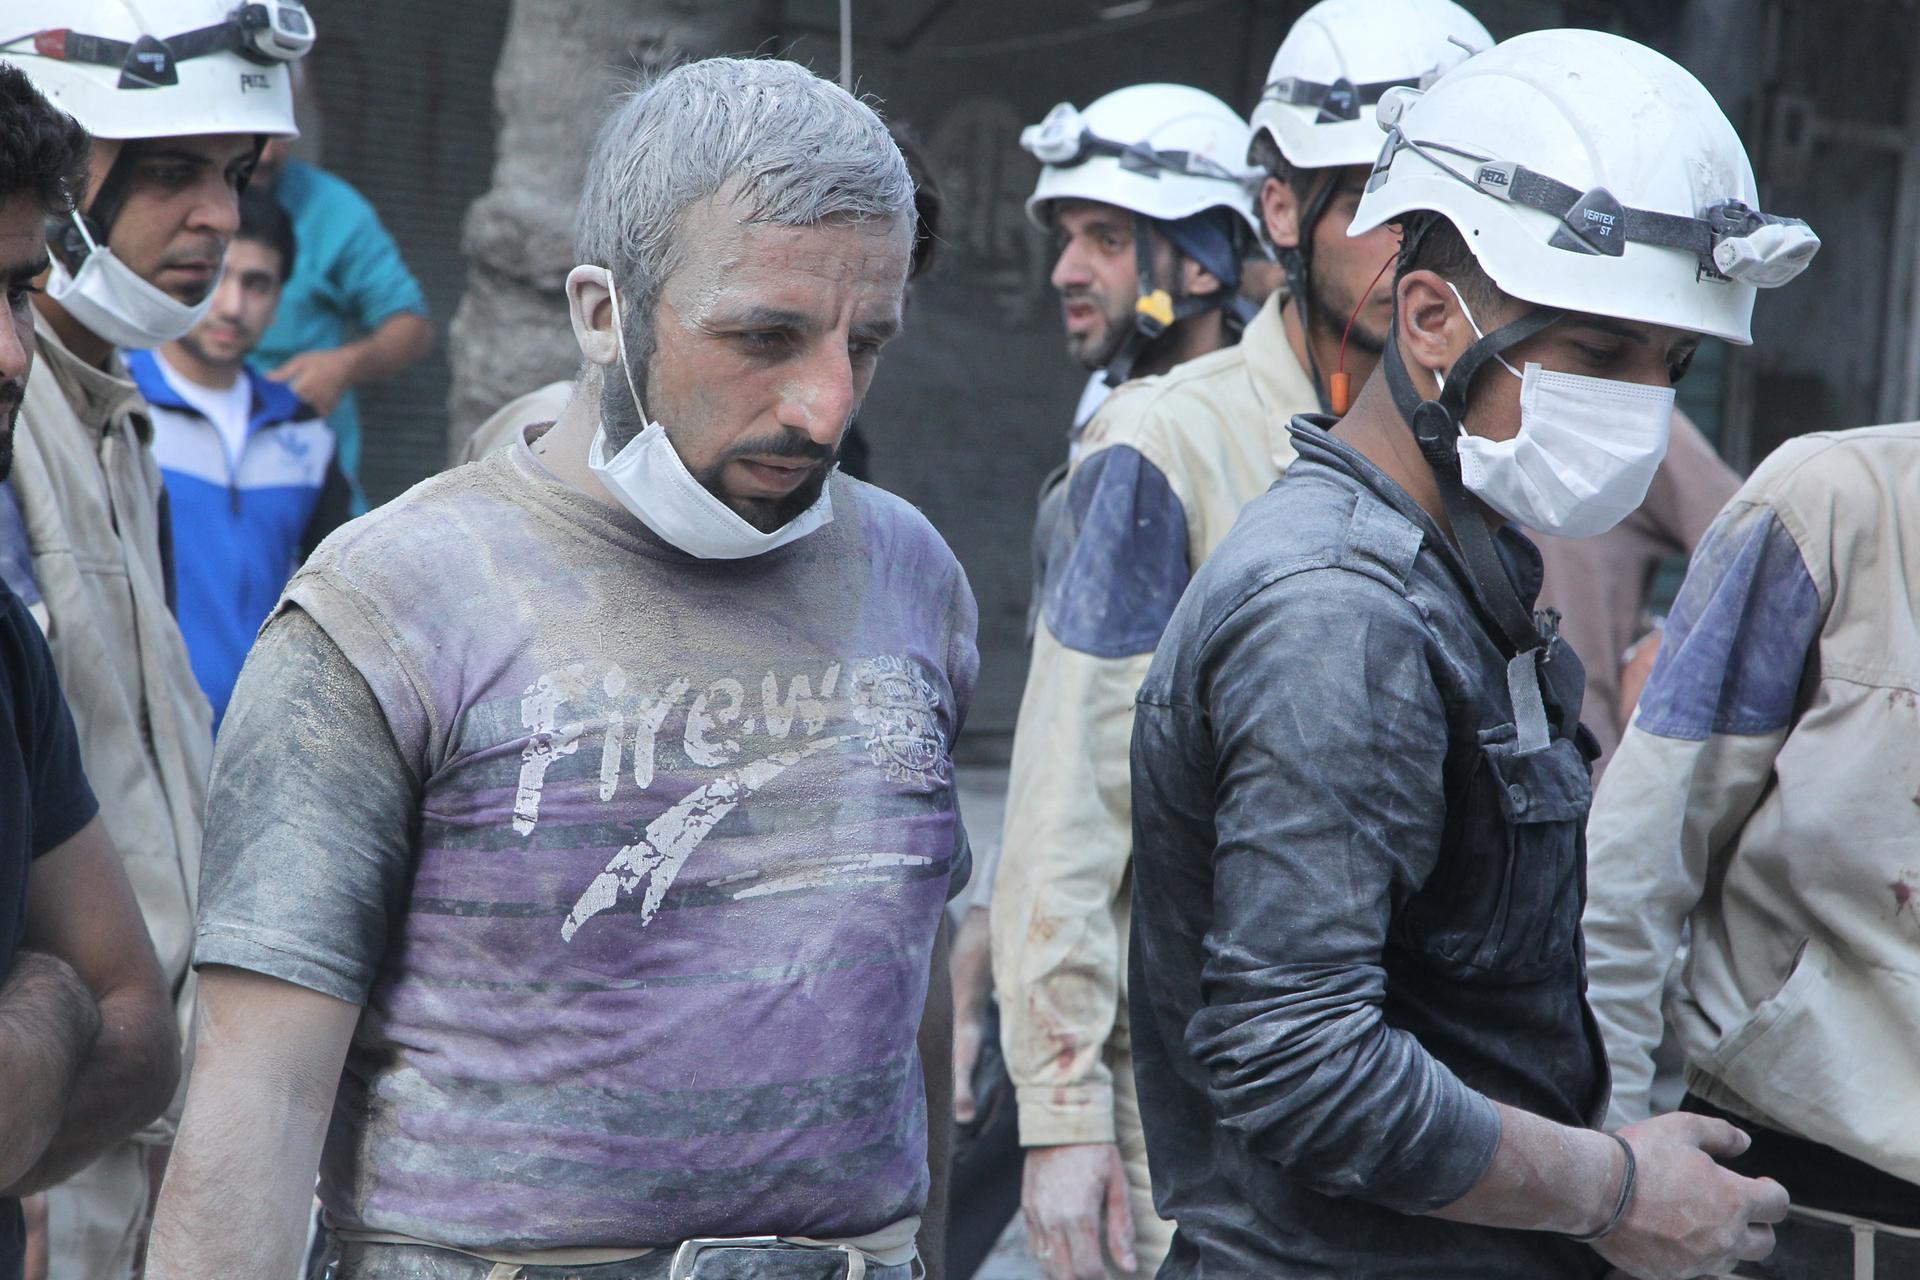 White Helmet volunteers search for survivors at a site reportedly hit with a barrel bomb in the Al-Shaar neighborhood of Aleppo, Syria, on September 17, 2015.